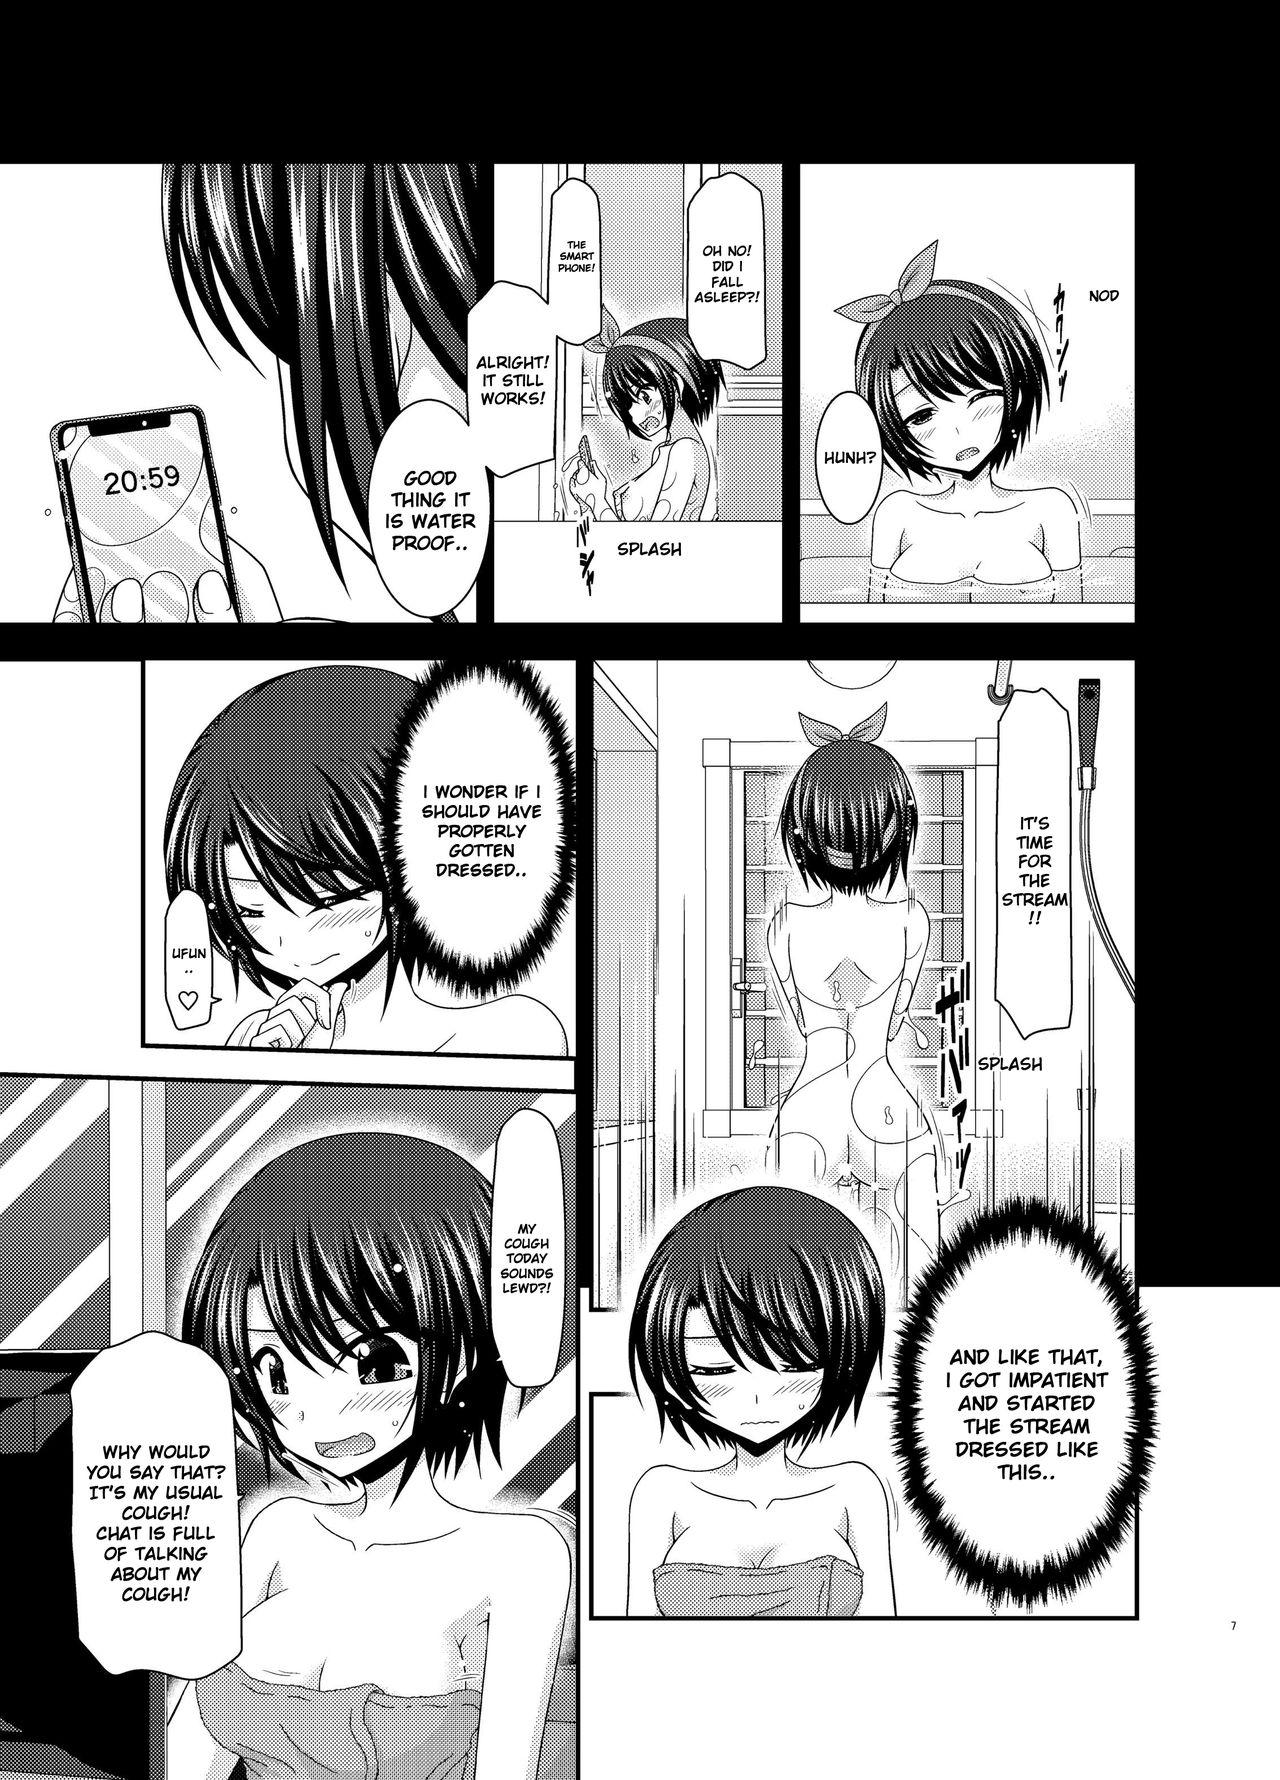 Whore Haishin Gamen no Mukougawa | The other side of the broadcast Gay Blondhair - Page 7